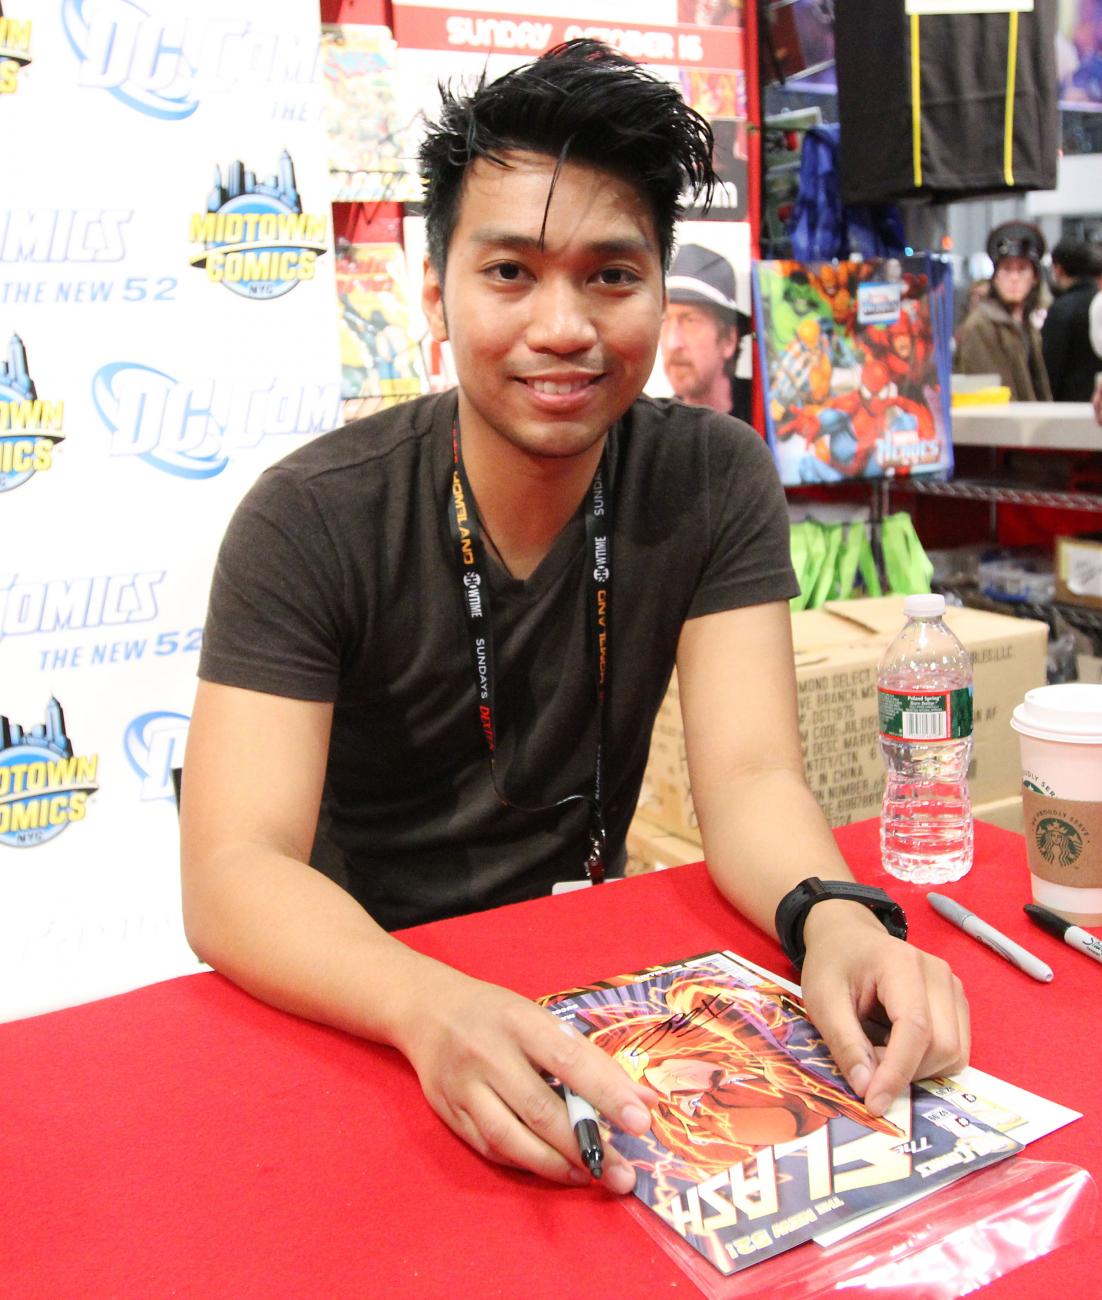 Francis Manapul sat at a desk about to sign a Flash comic.